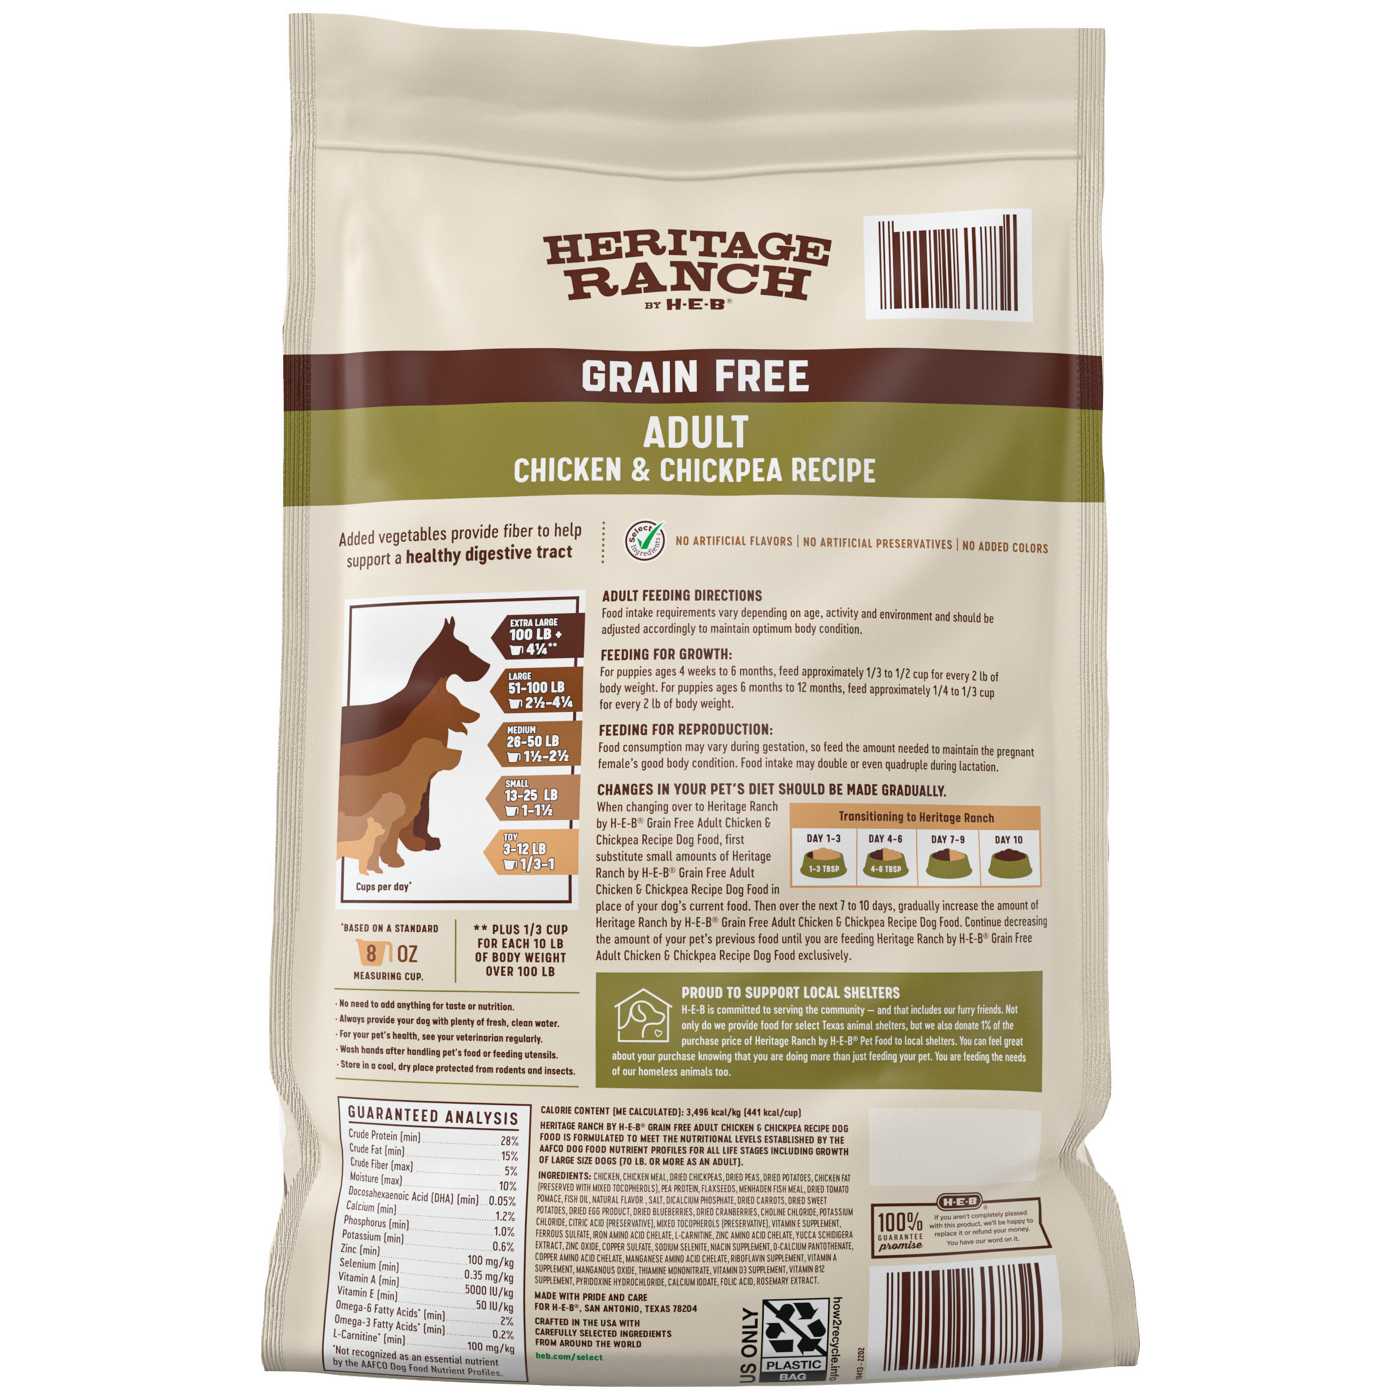 Heritage Ranch by H-E-B Adult Grain-Free Dry Dog Food - Chicken & Chickpea; image 2 of 2